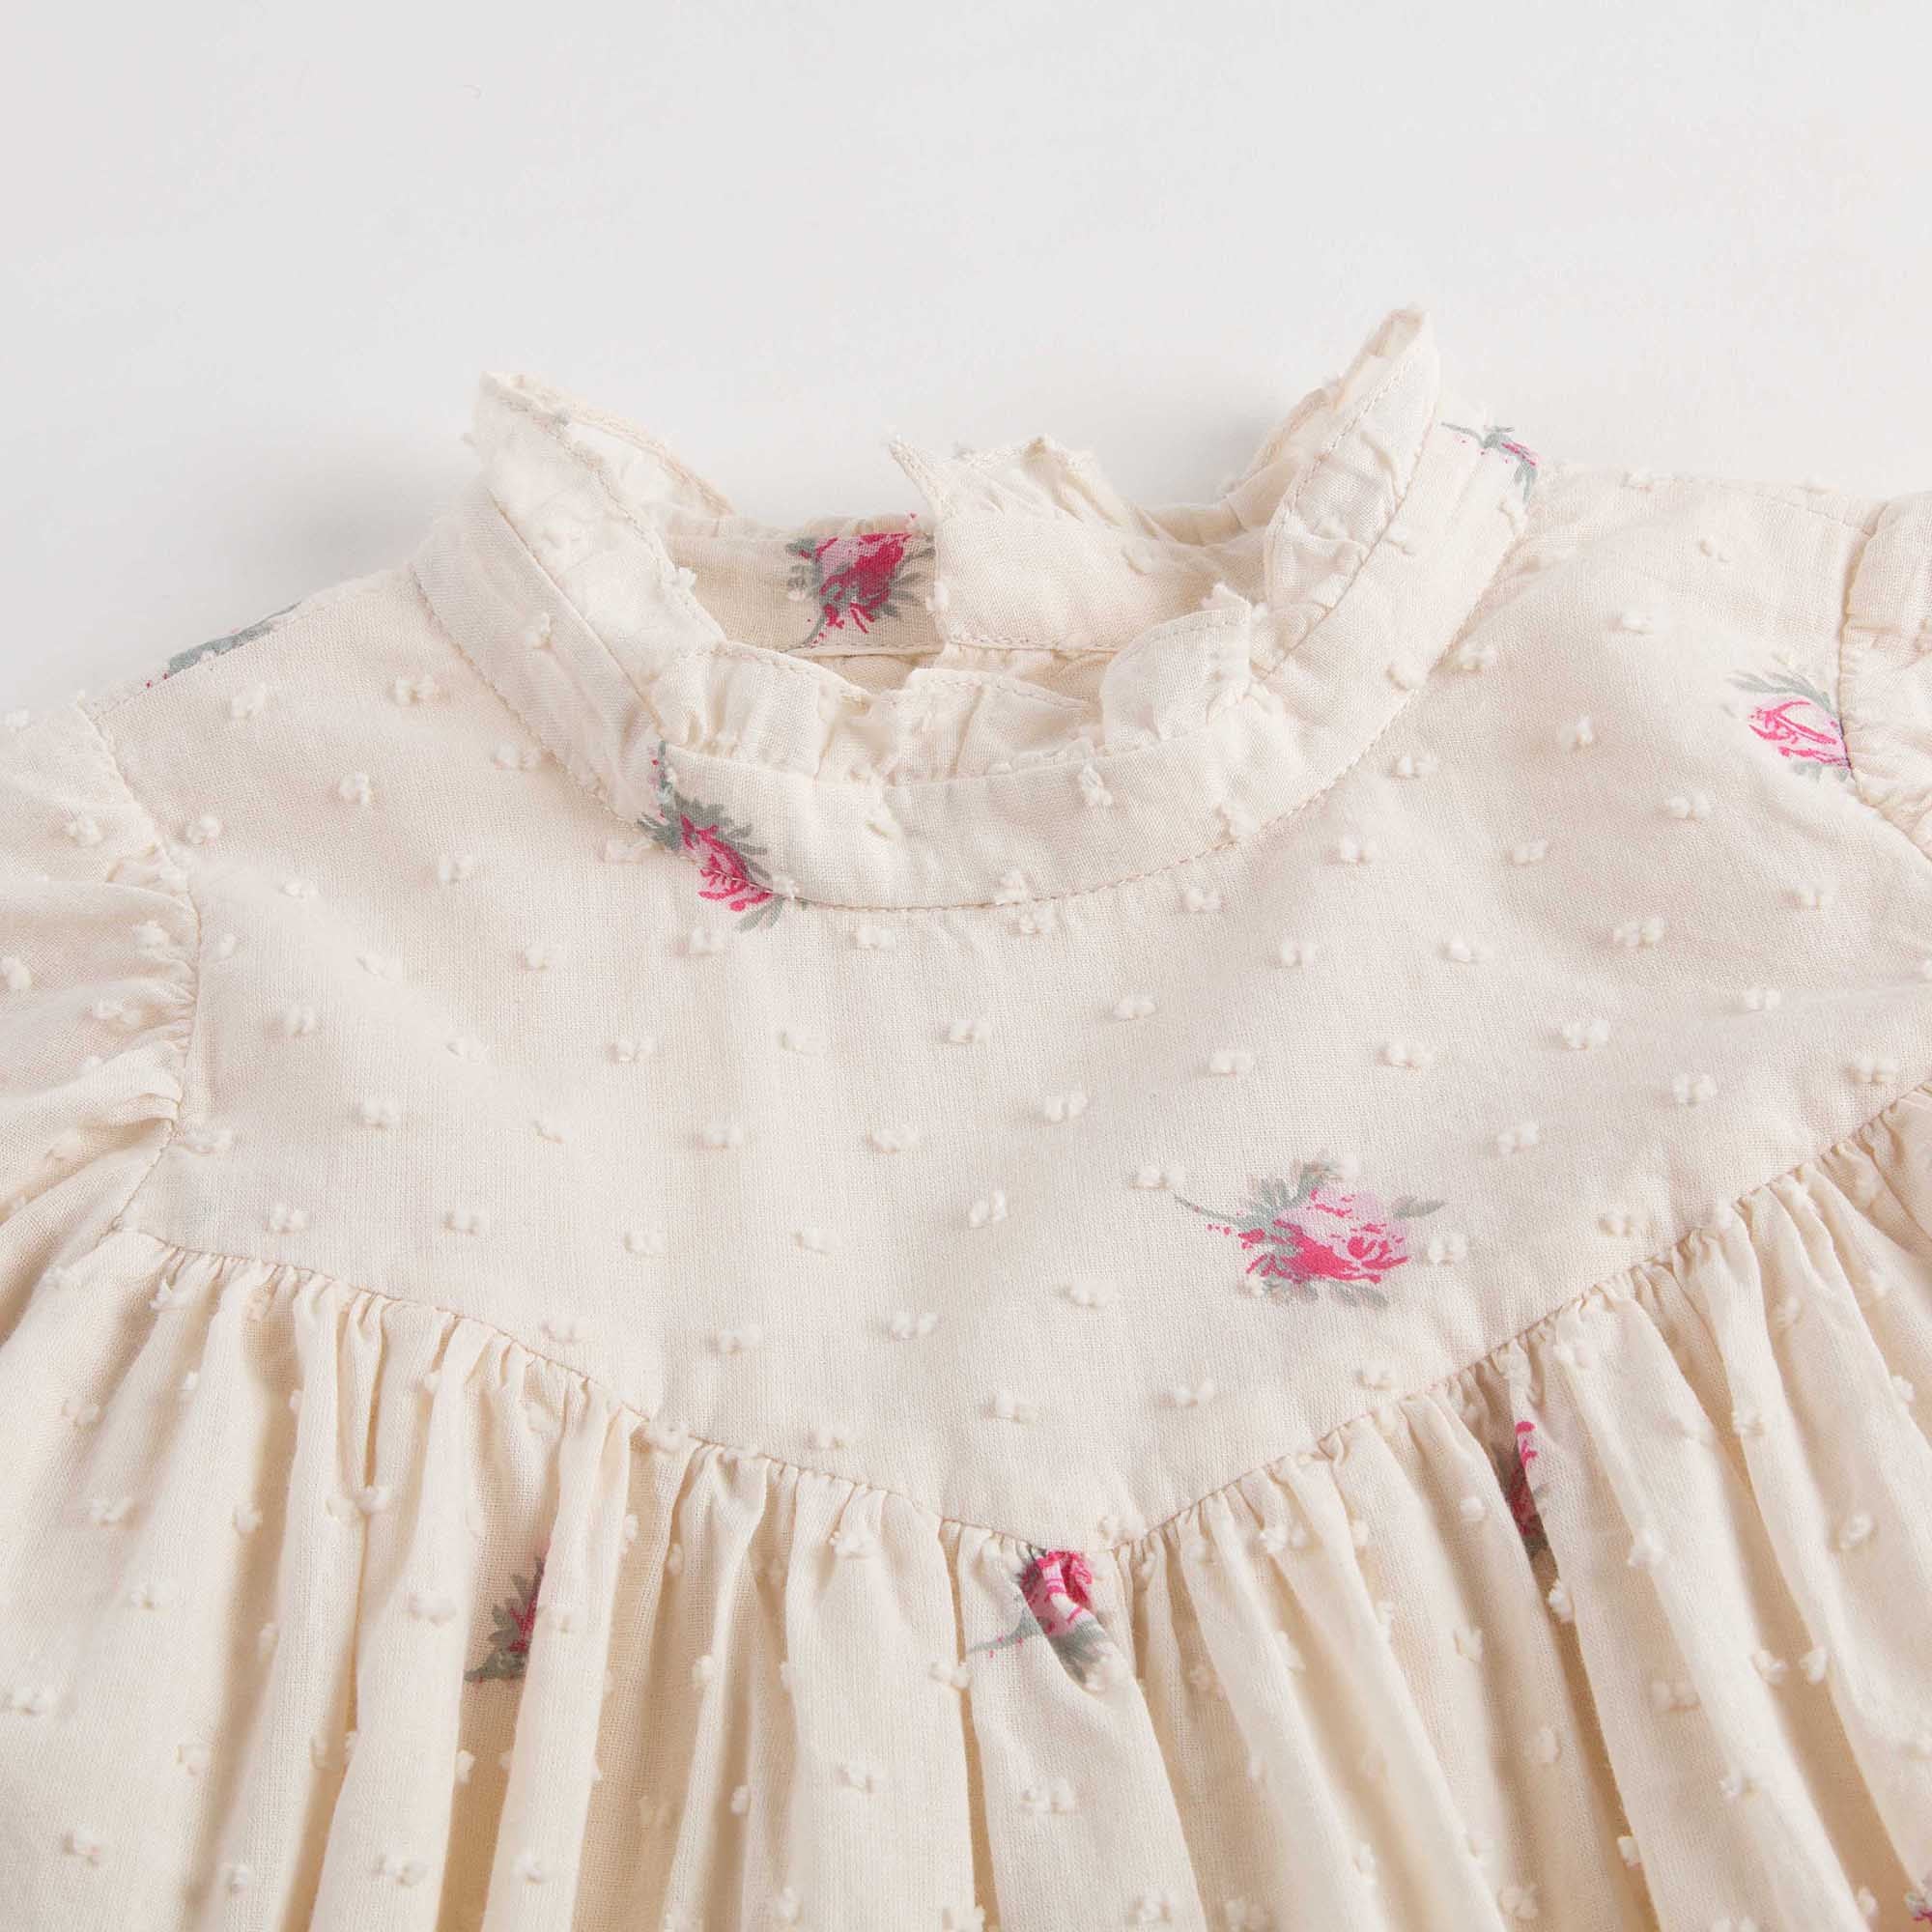 Girls Lvory With Pink Flowers Dresses - CÉMAROSE | Children's Fashion Store - 3